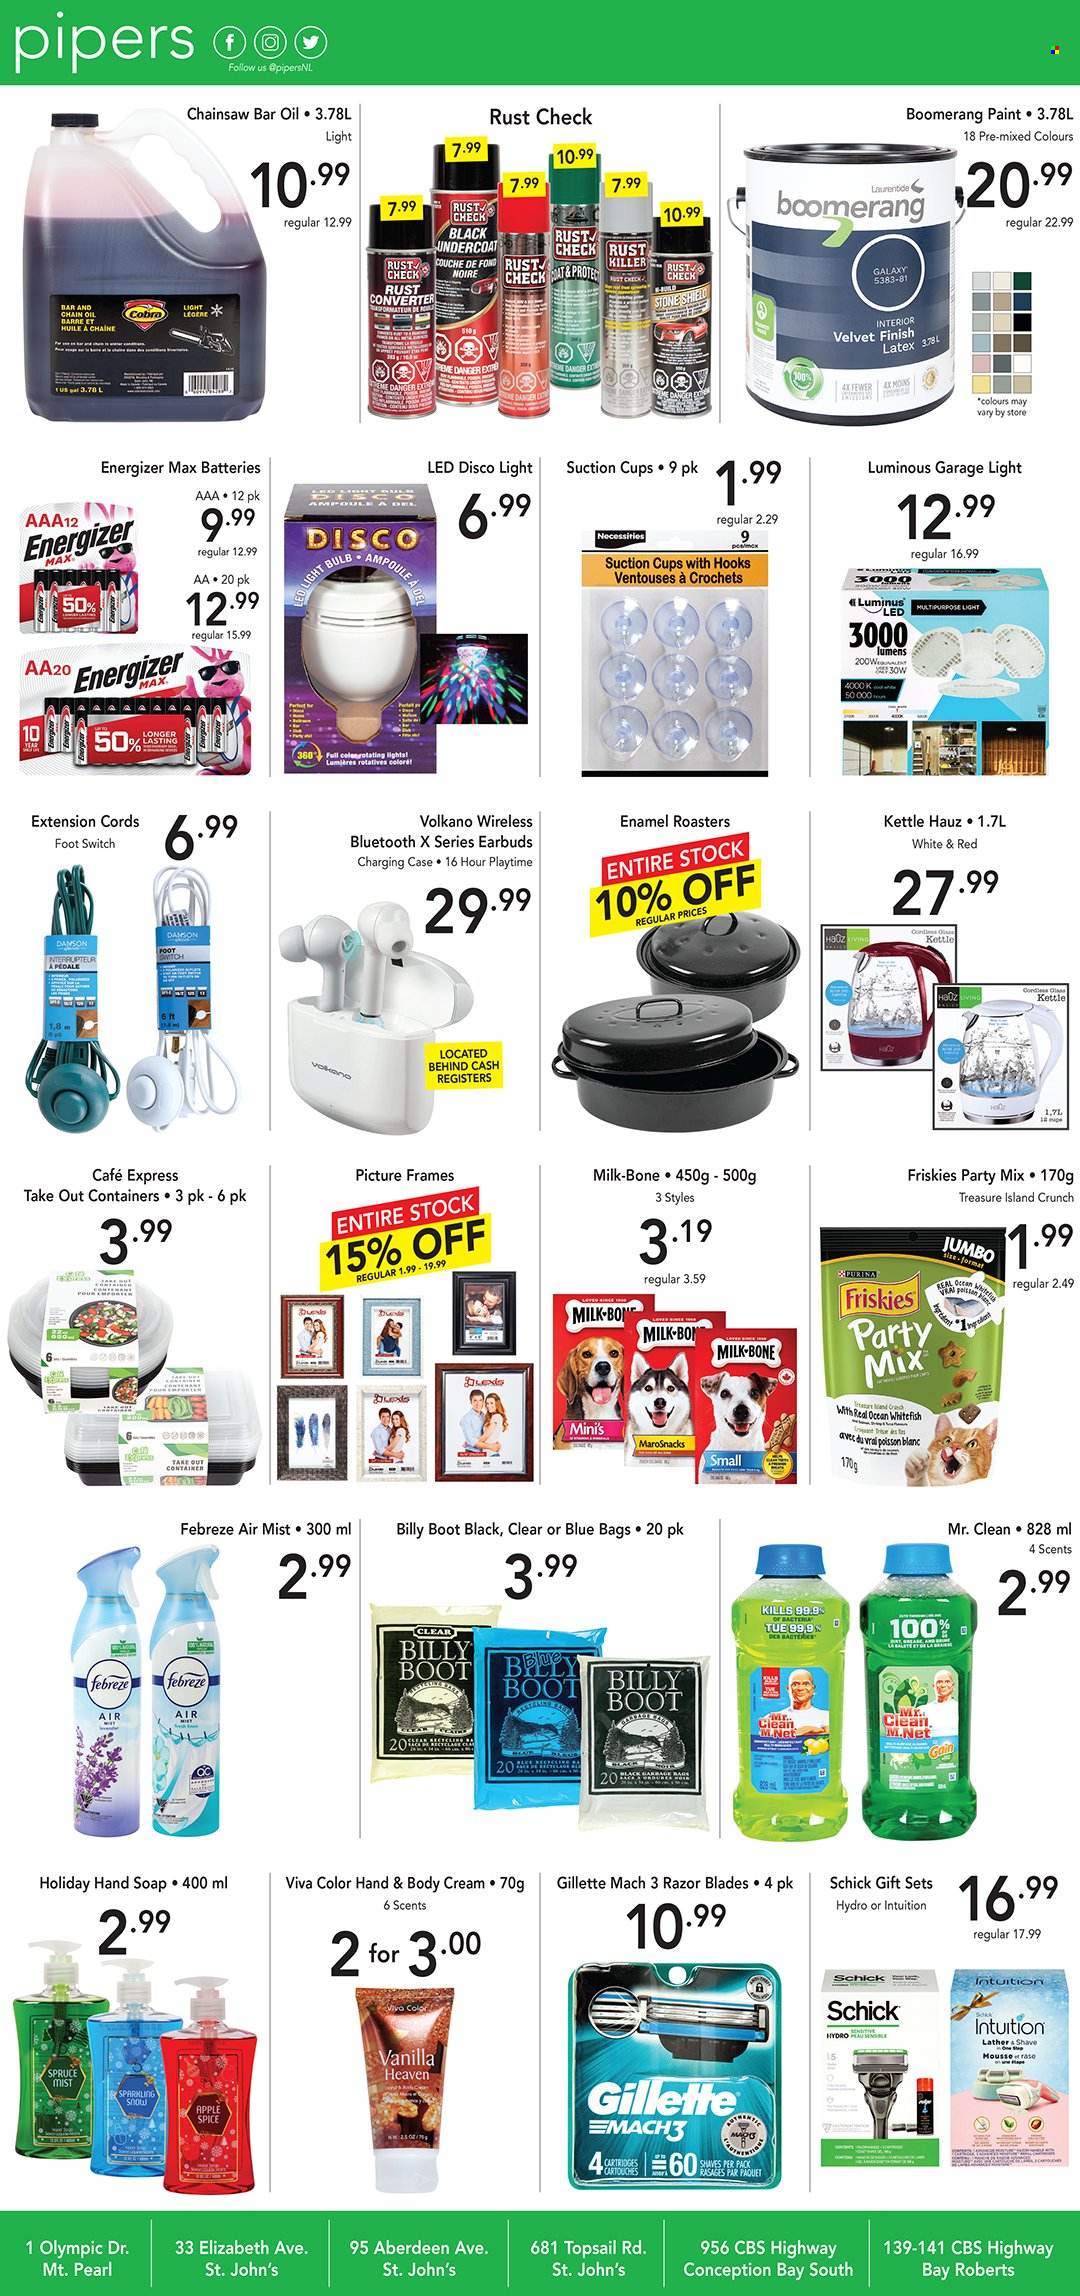 thumbnail - Pipers Flyer - November 24, 2022 - November 30, 2022 - Sales products - whitefish, milk, spice, oil, switch, Febreze, hand soap, soap, Gillette, razor, Schick, bag, cup, container, battery, bulb, LED bulb, light bulb, Purina, Friskies, picture frame, paint, Energizer. Page 6.